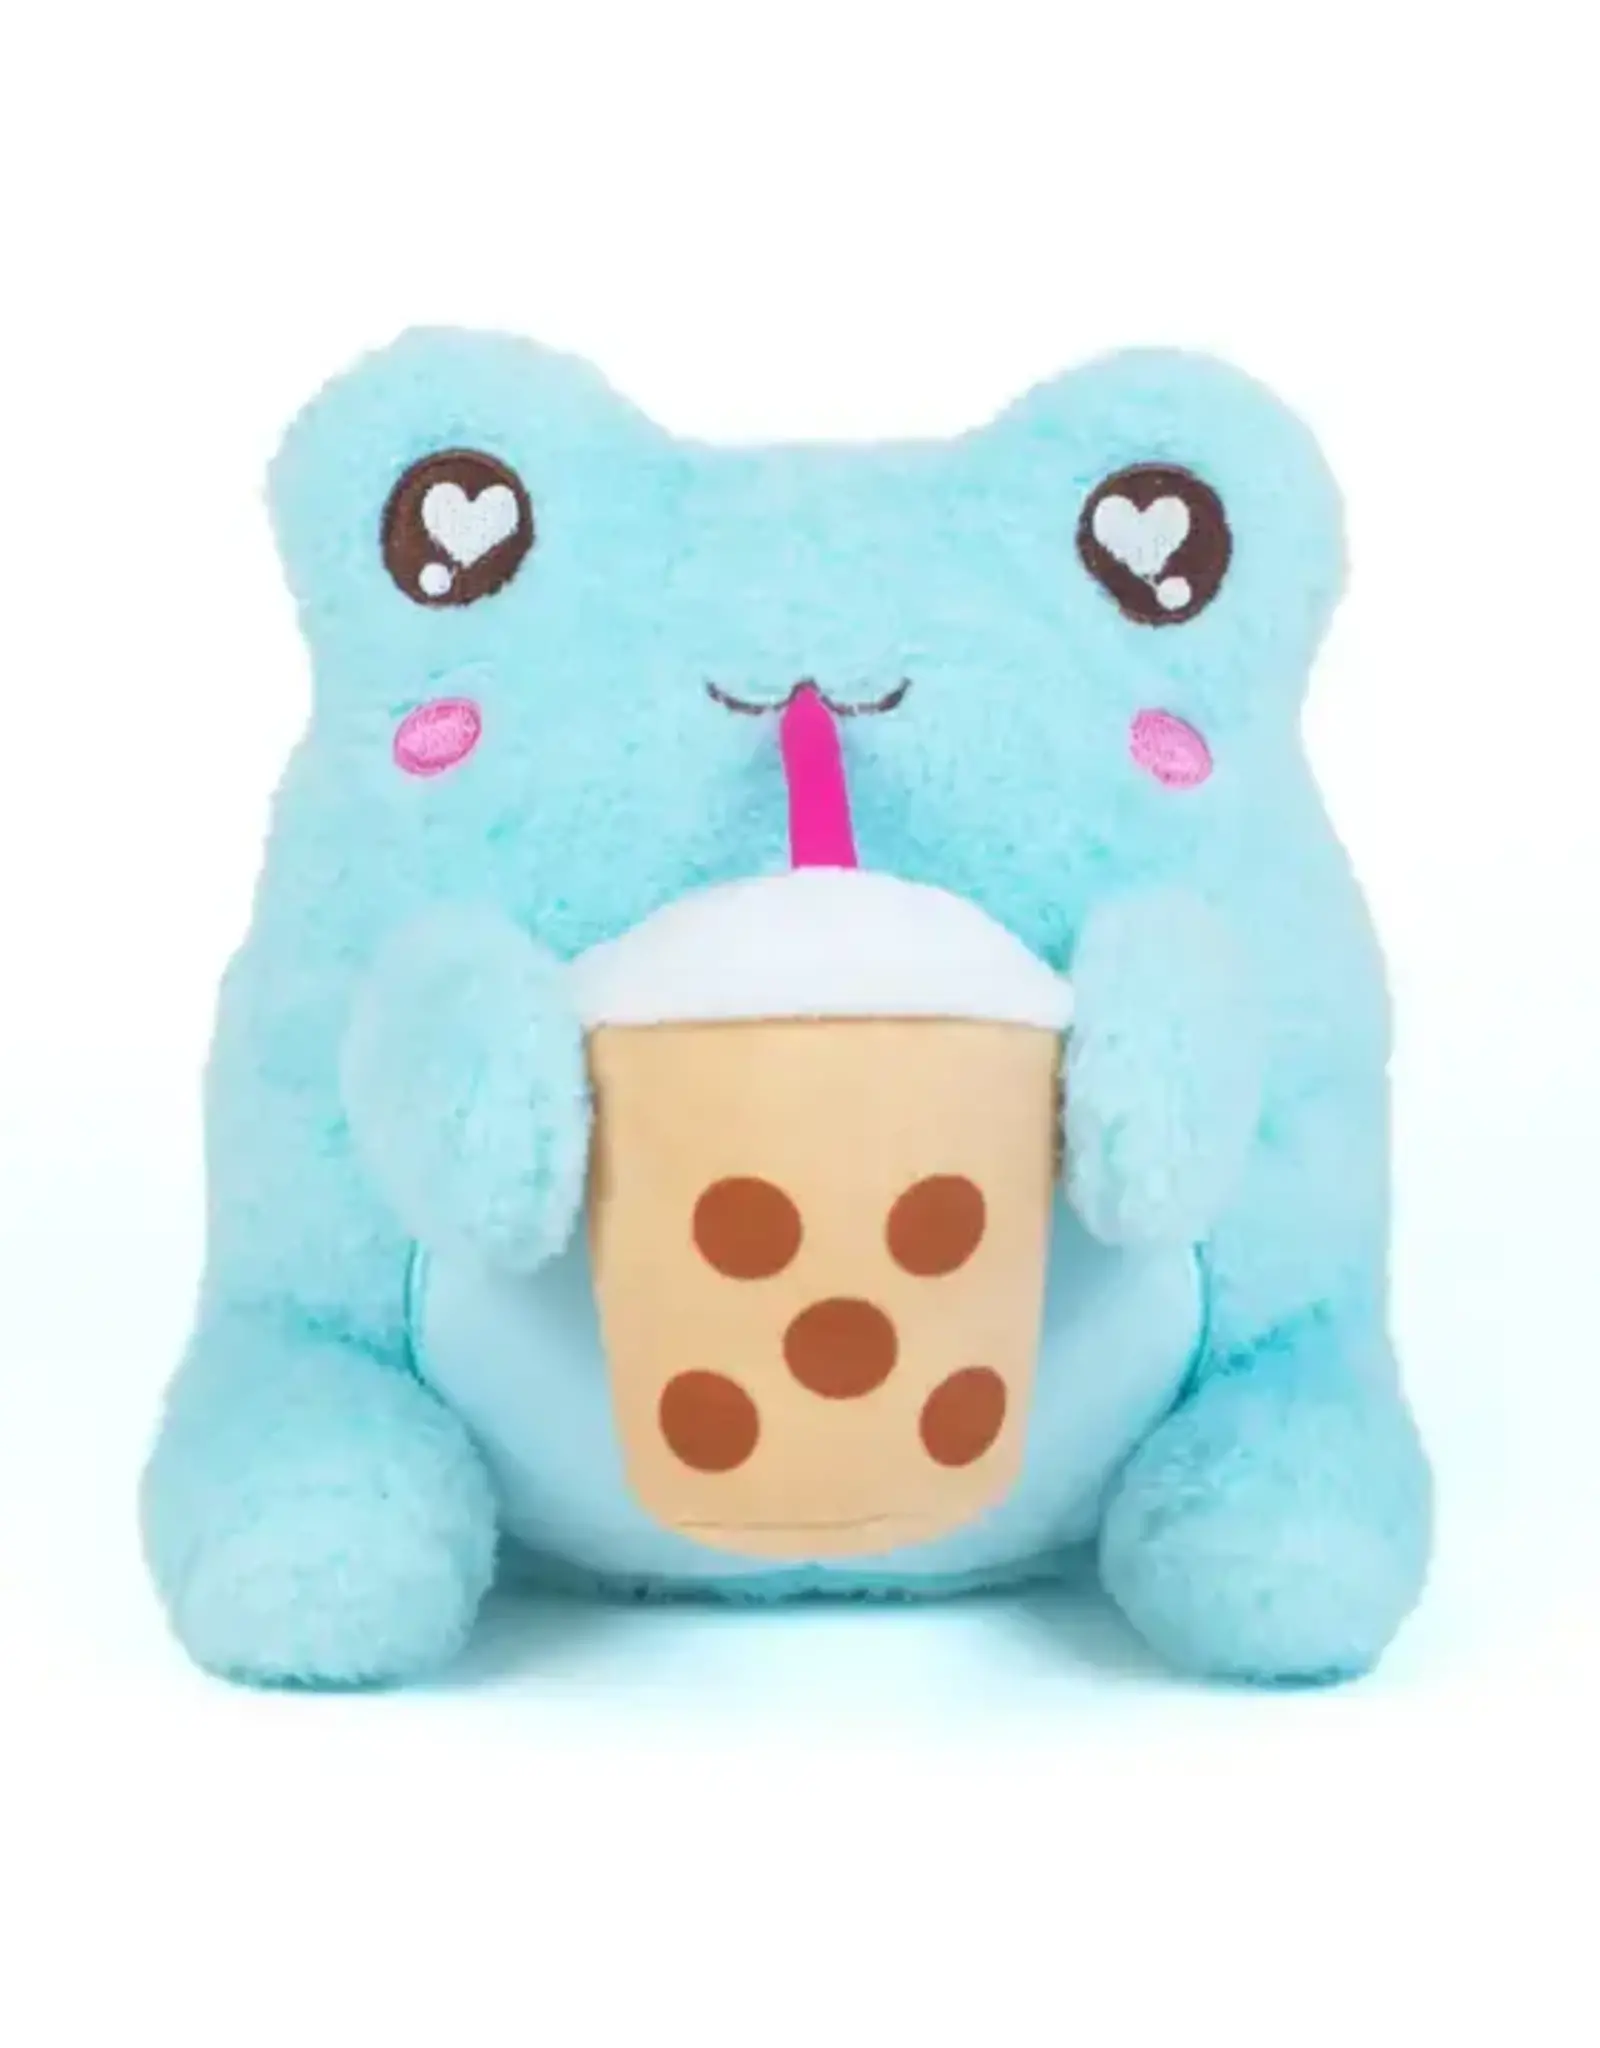 Boba Sippin' Frog Plush (Boba Scented)